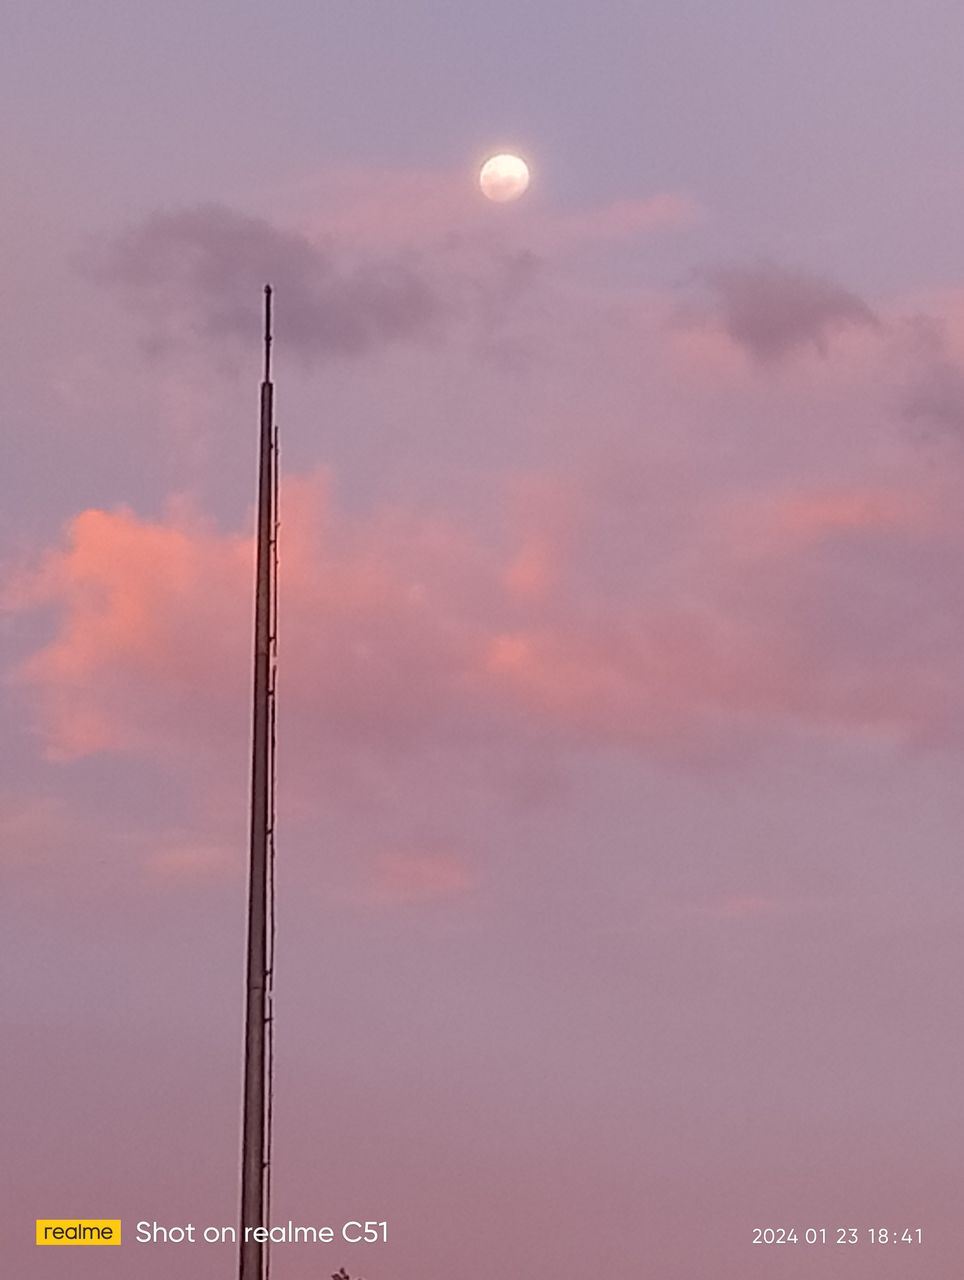 sky, moon, cloud, nature, no people, sunset, architecture, dawn, beauty in nature, horizon, outdoors, built structure, pink, technology